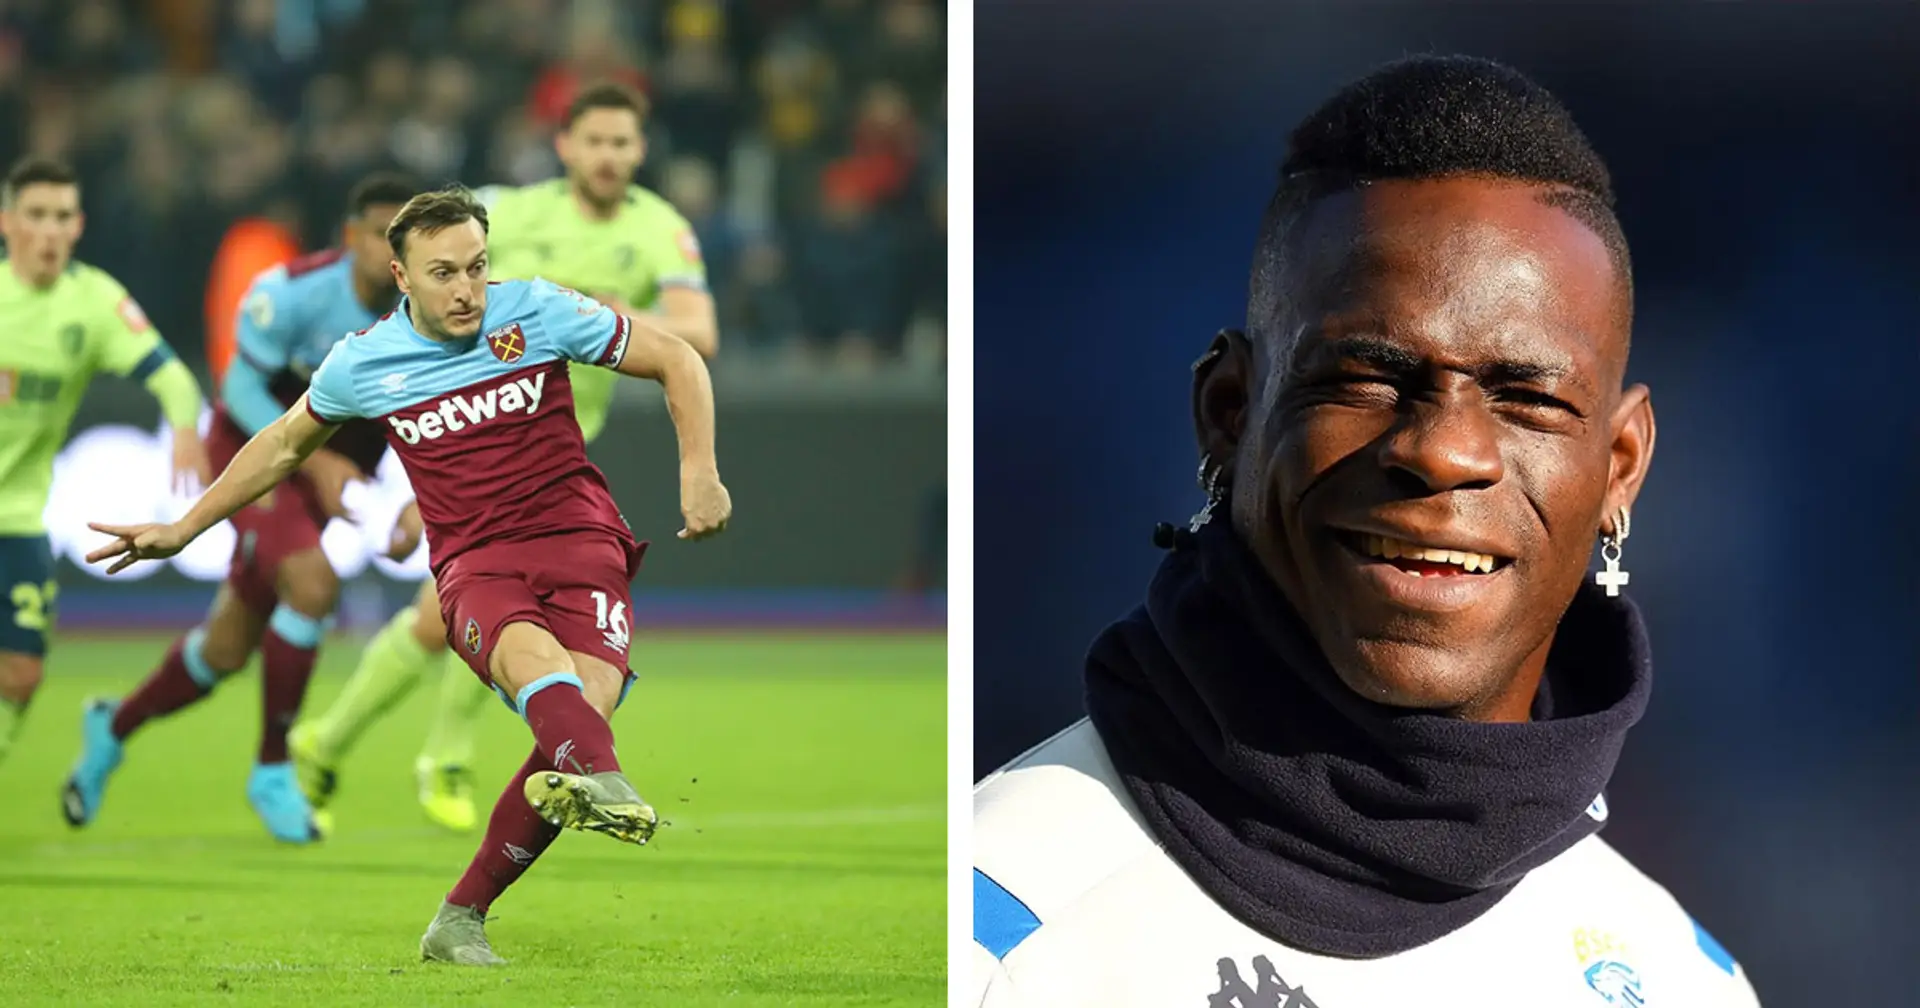 Mark Noble, Mario Balotelli and more: Top 5 penalty takers since 2000 revealed